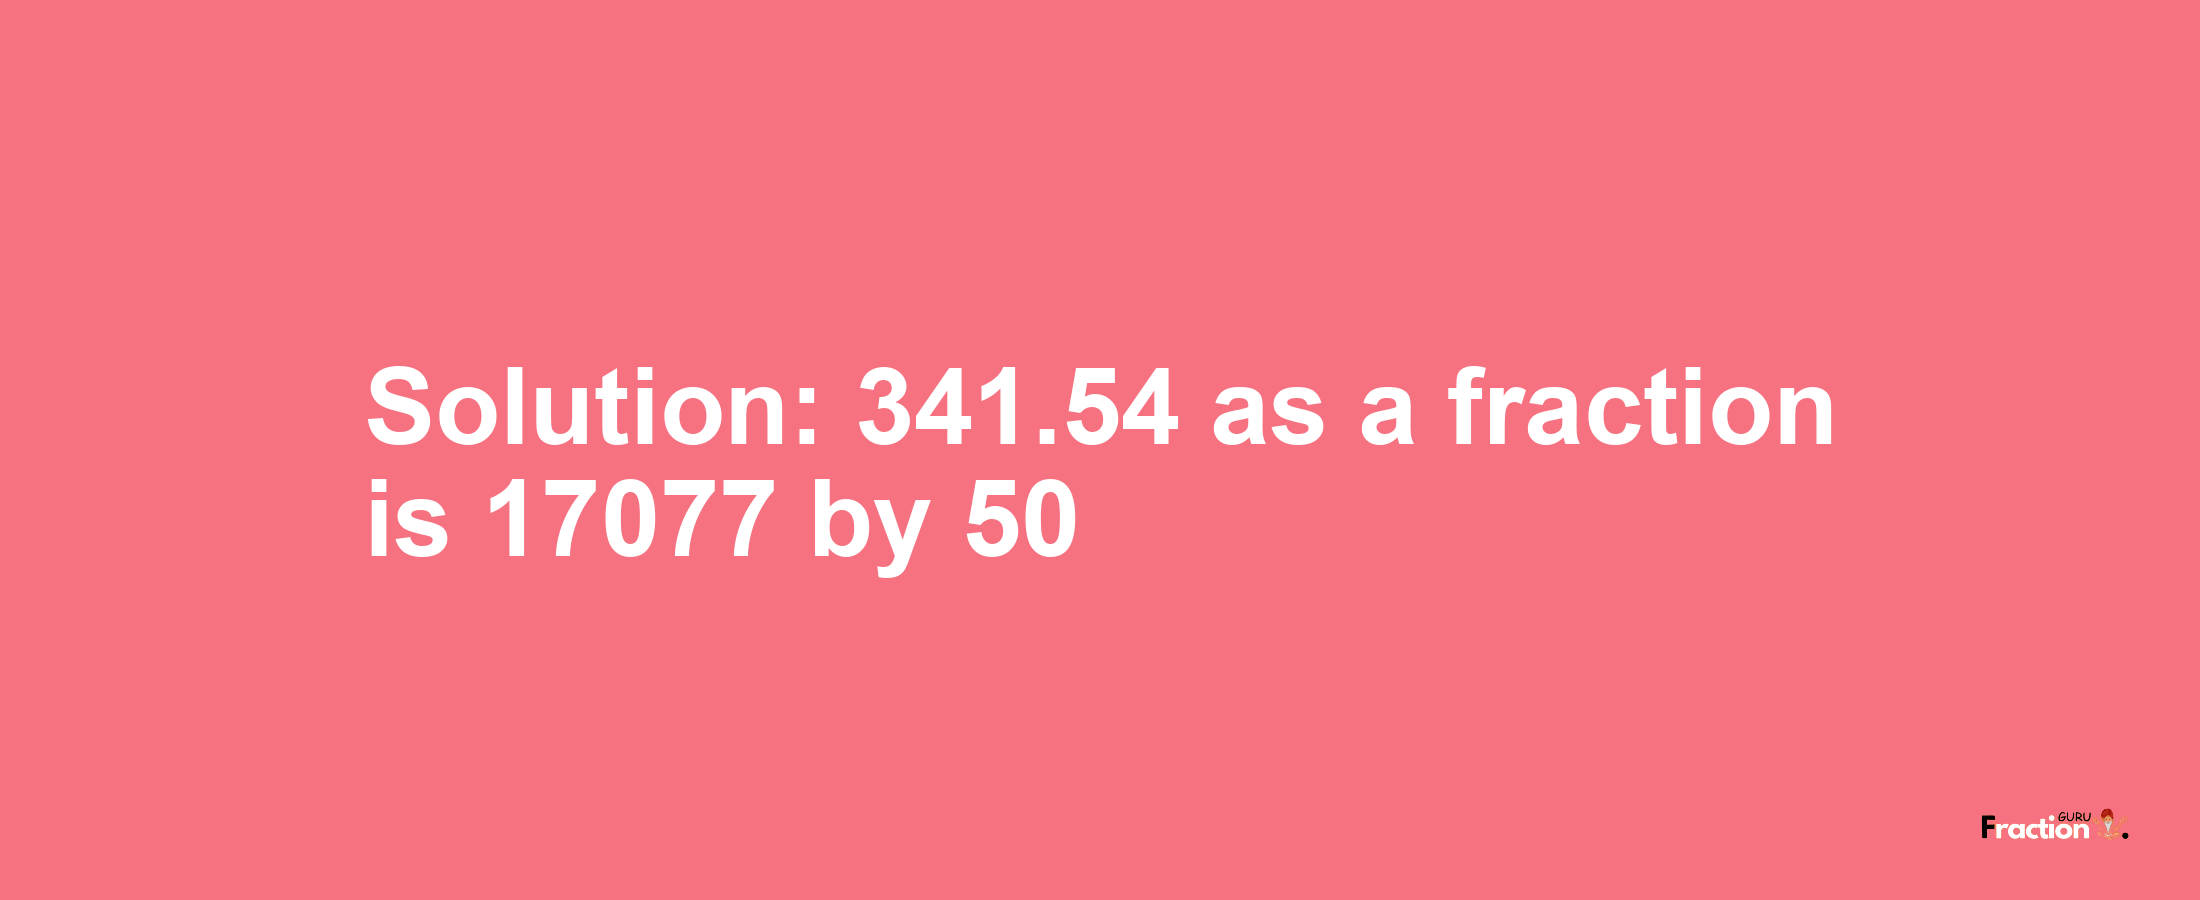 Solution:341.54 as a fraction is 17077/50